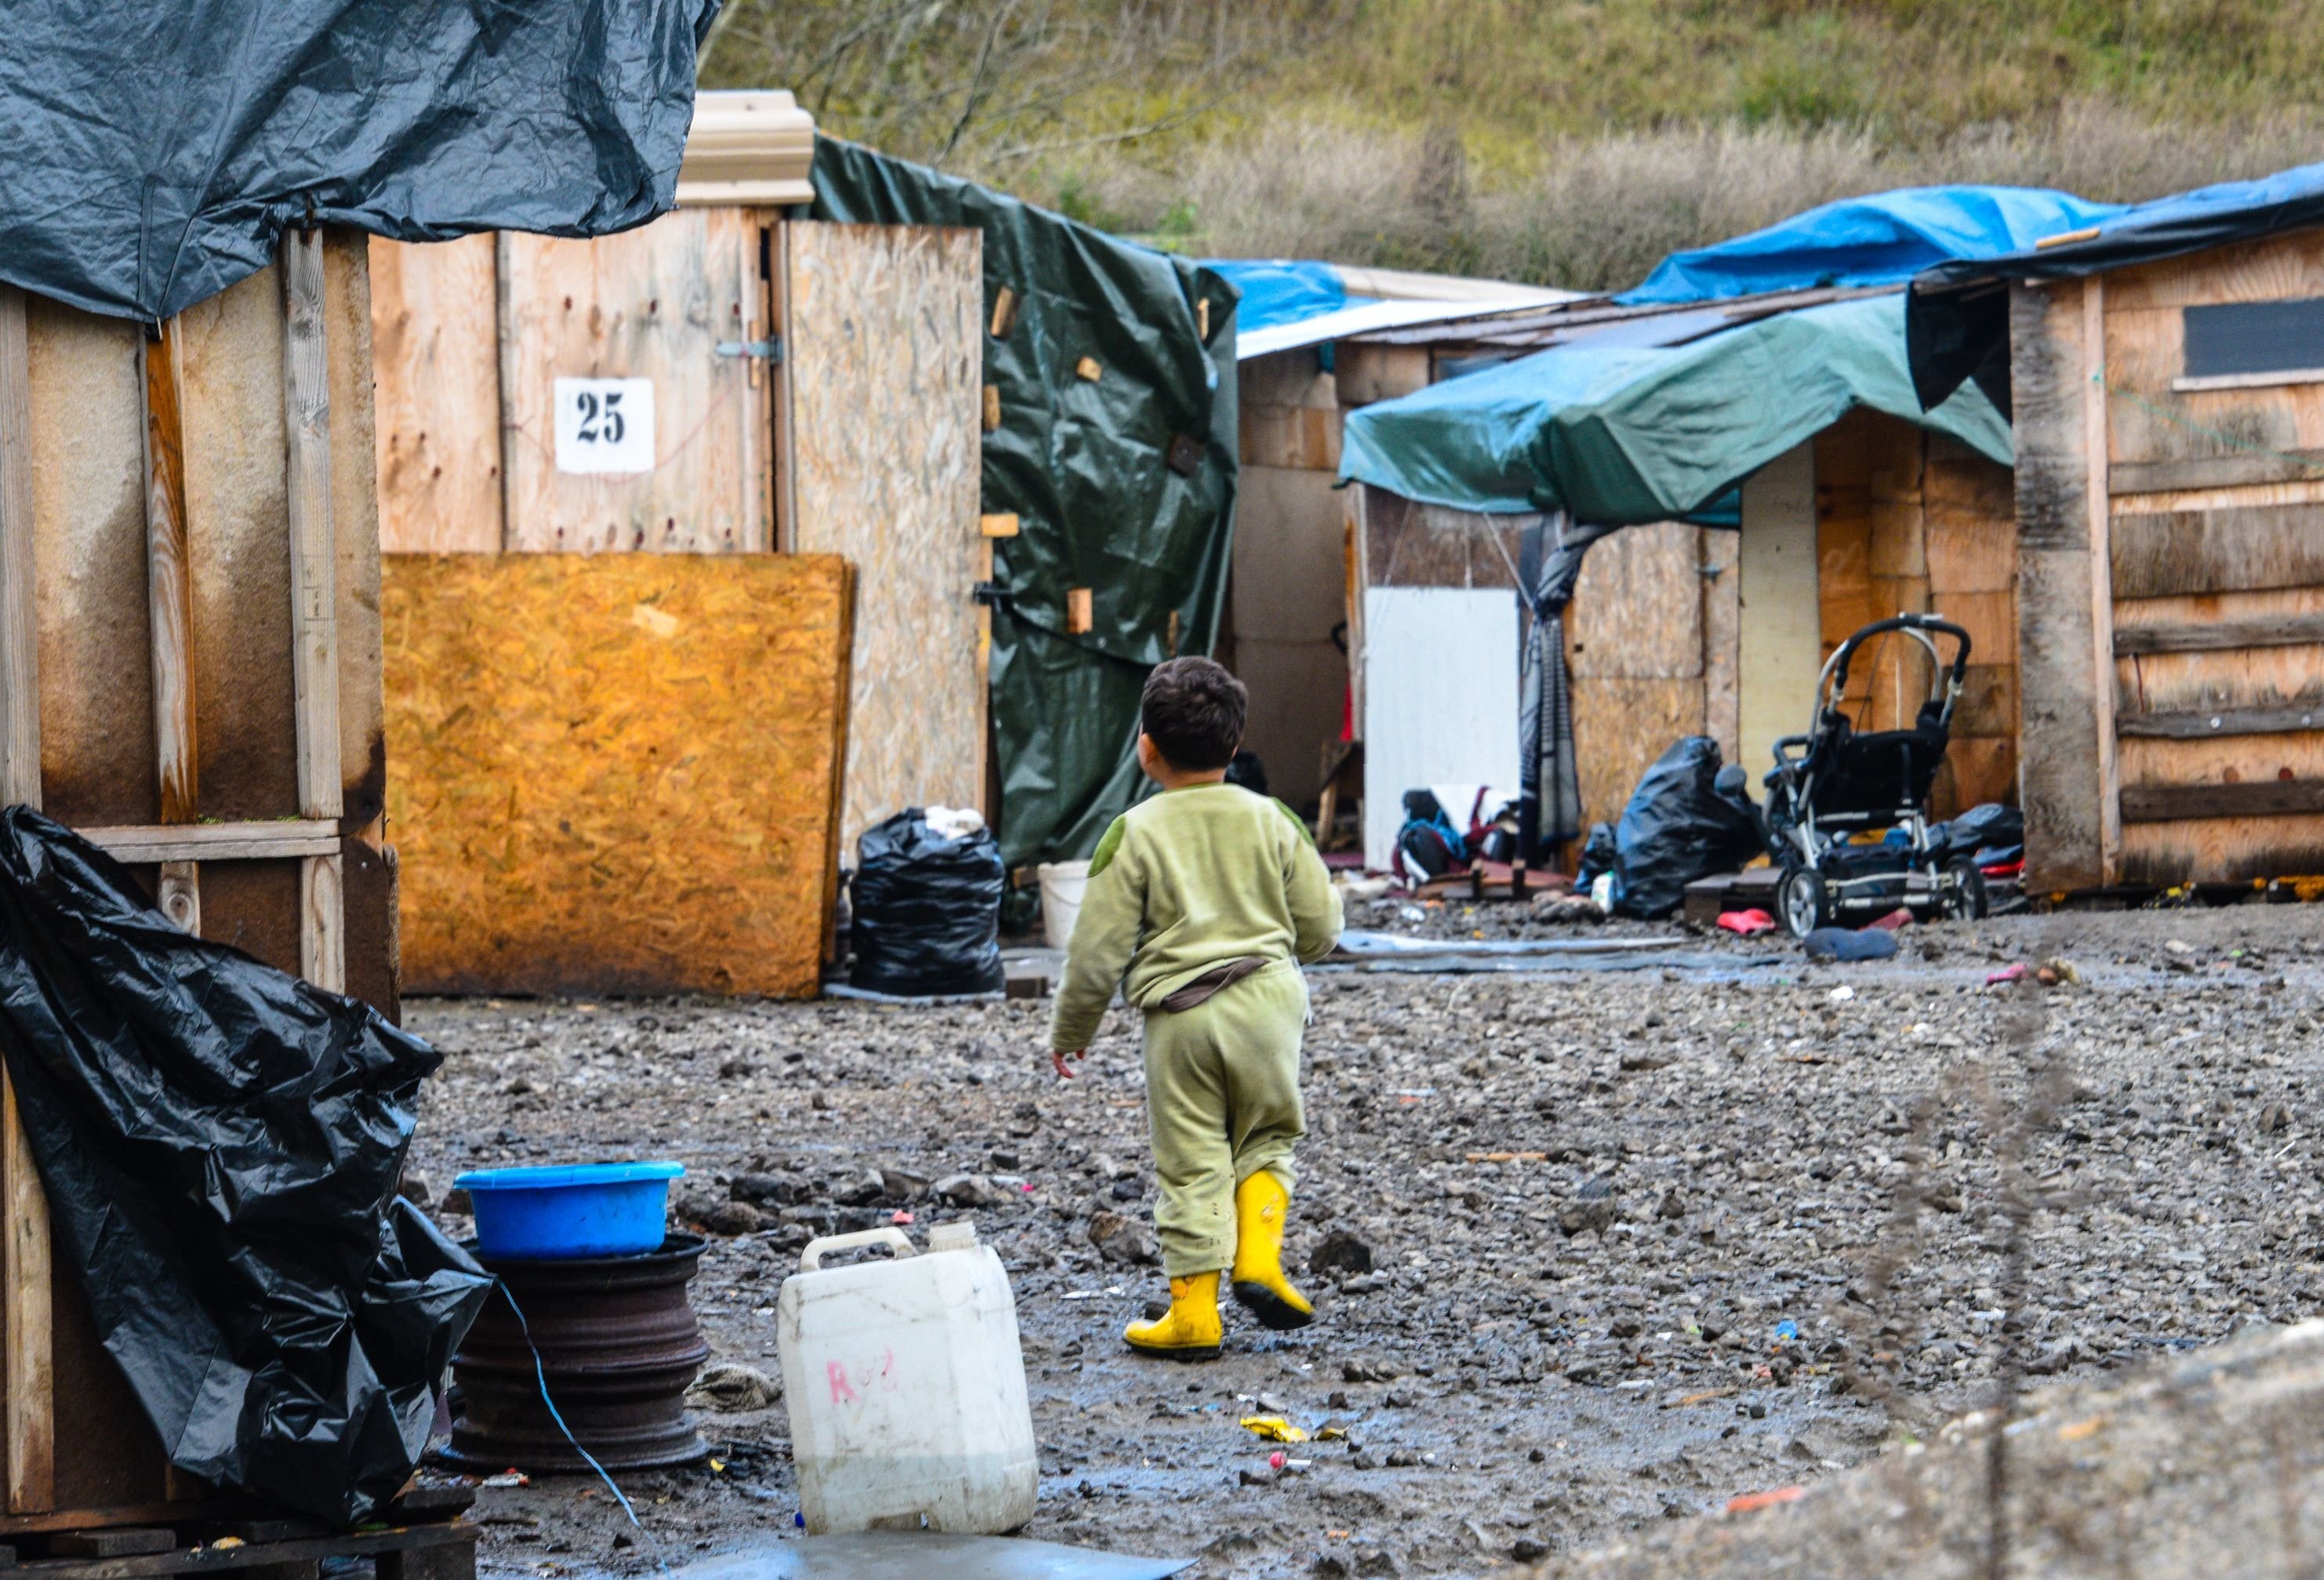 <strong>A child refugee in a migrant camp in France last year&nbsp;</strong>